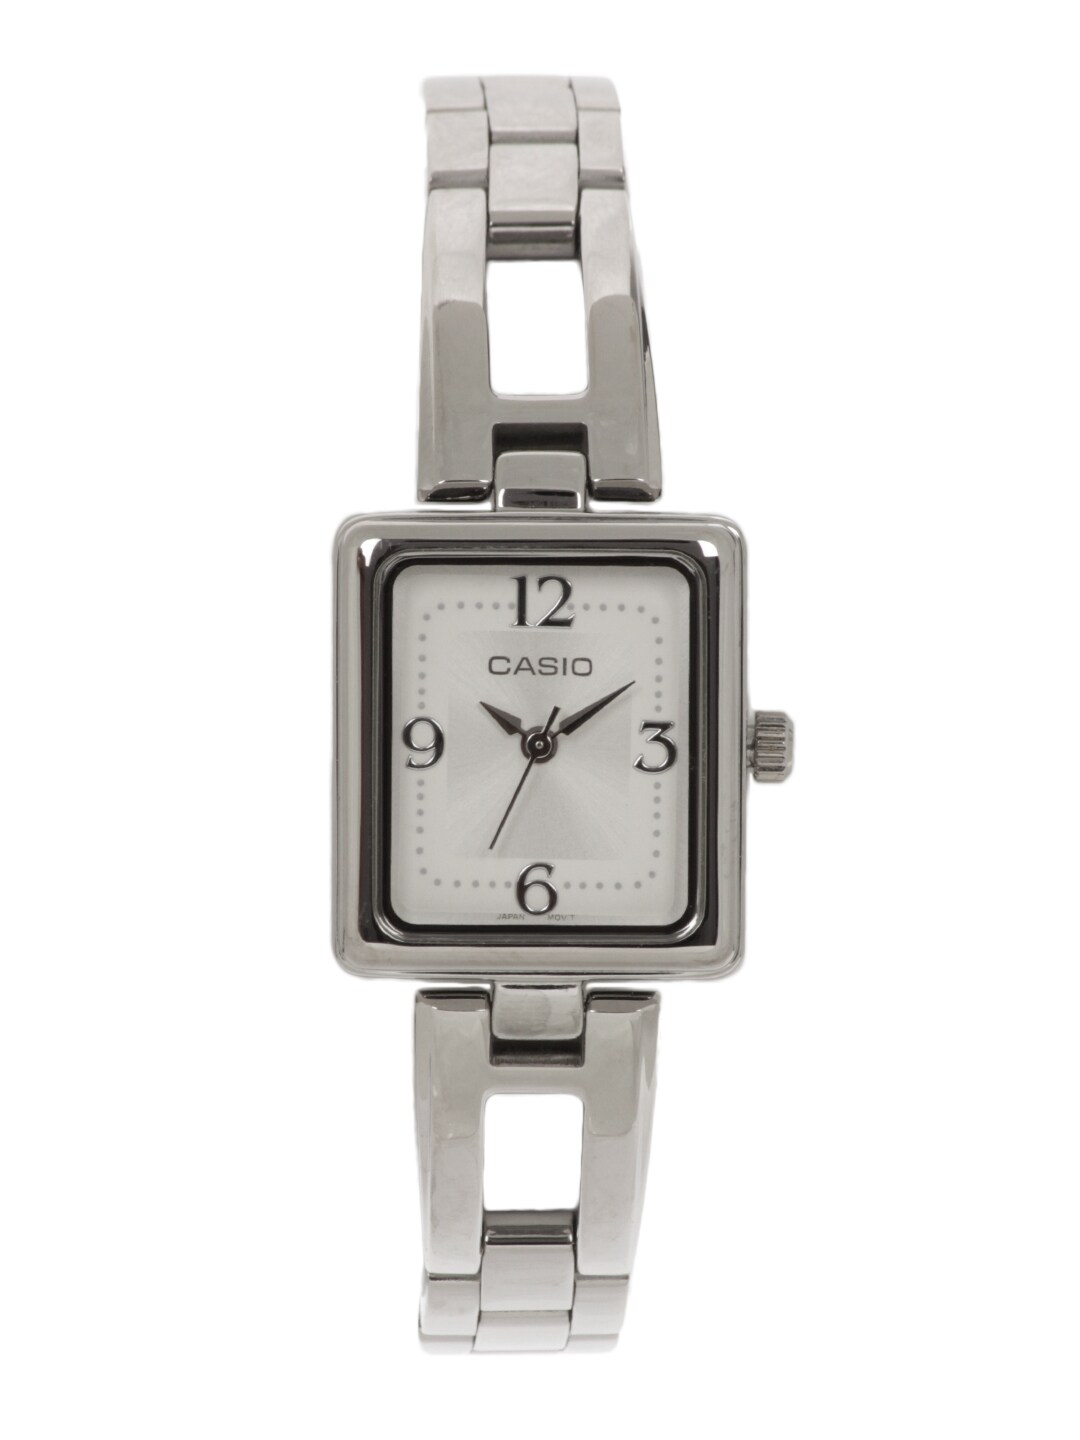 CASIO ENTICER Women White Dial Analogue Watch A636